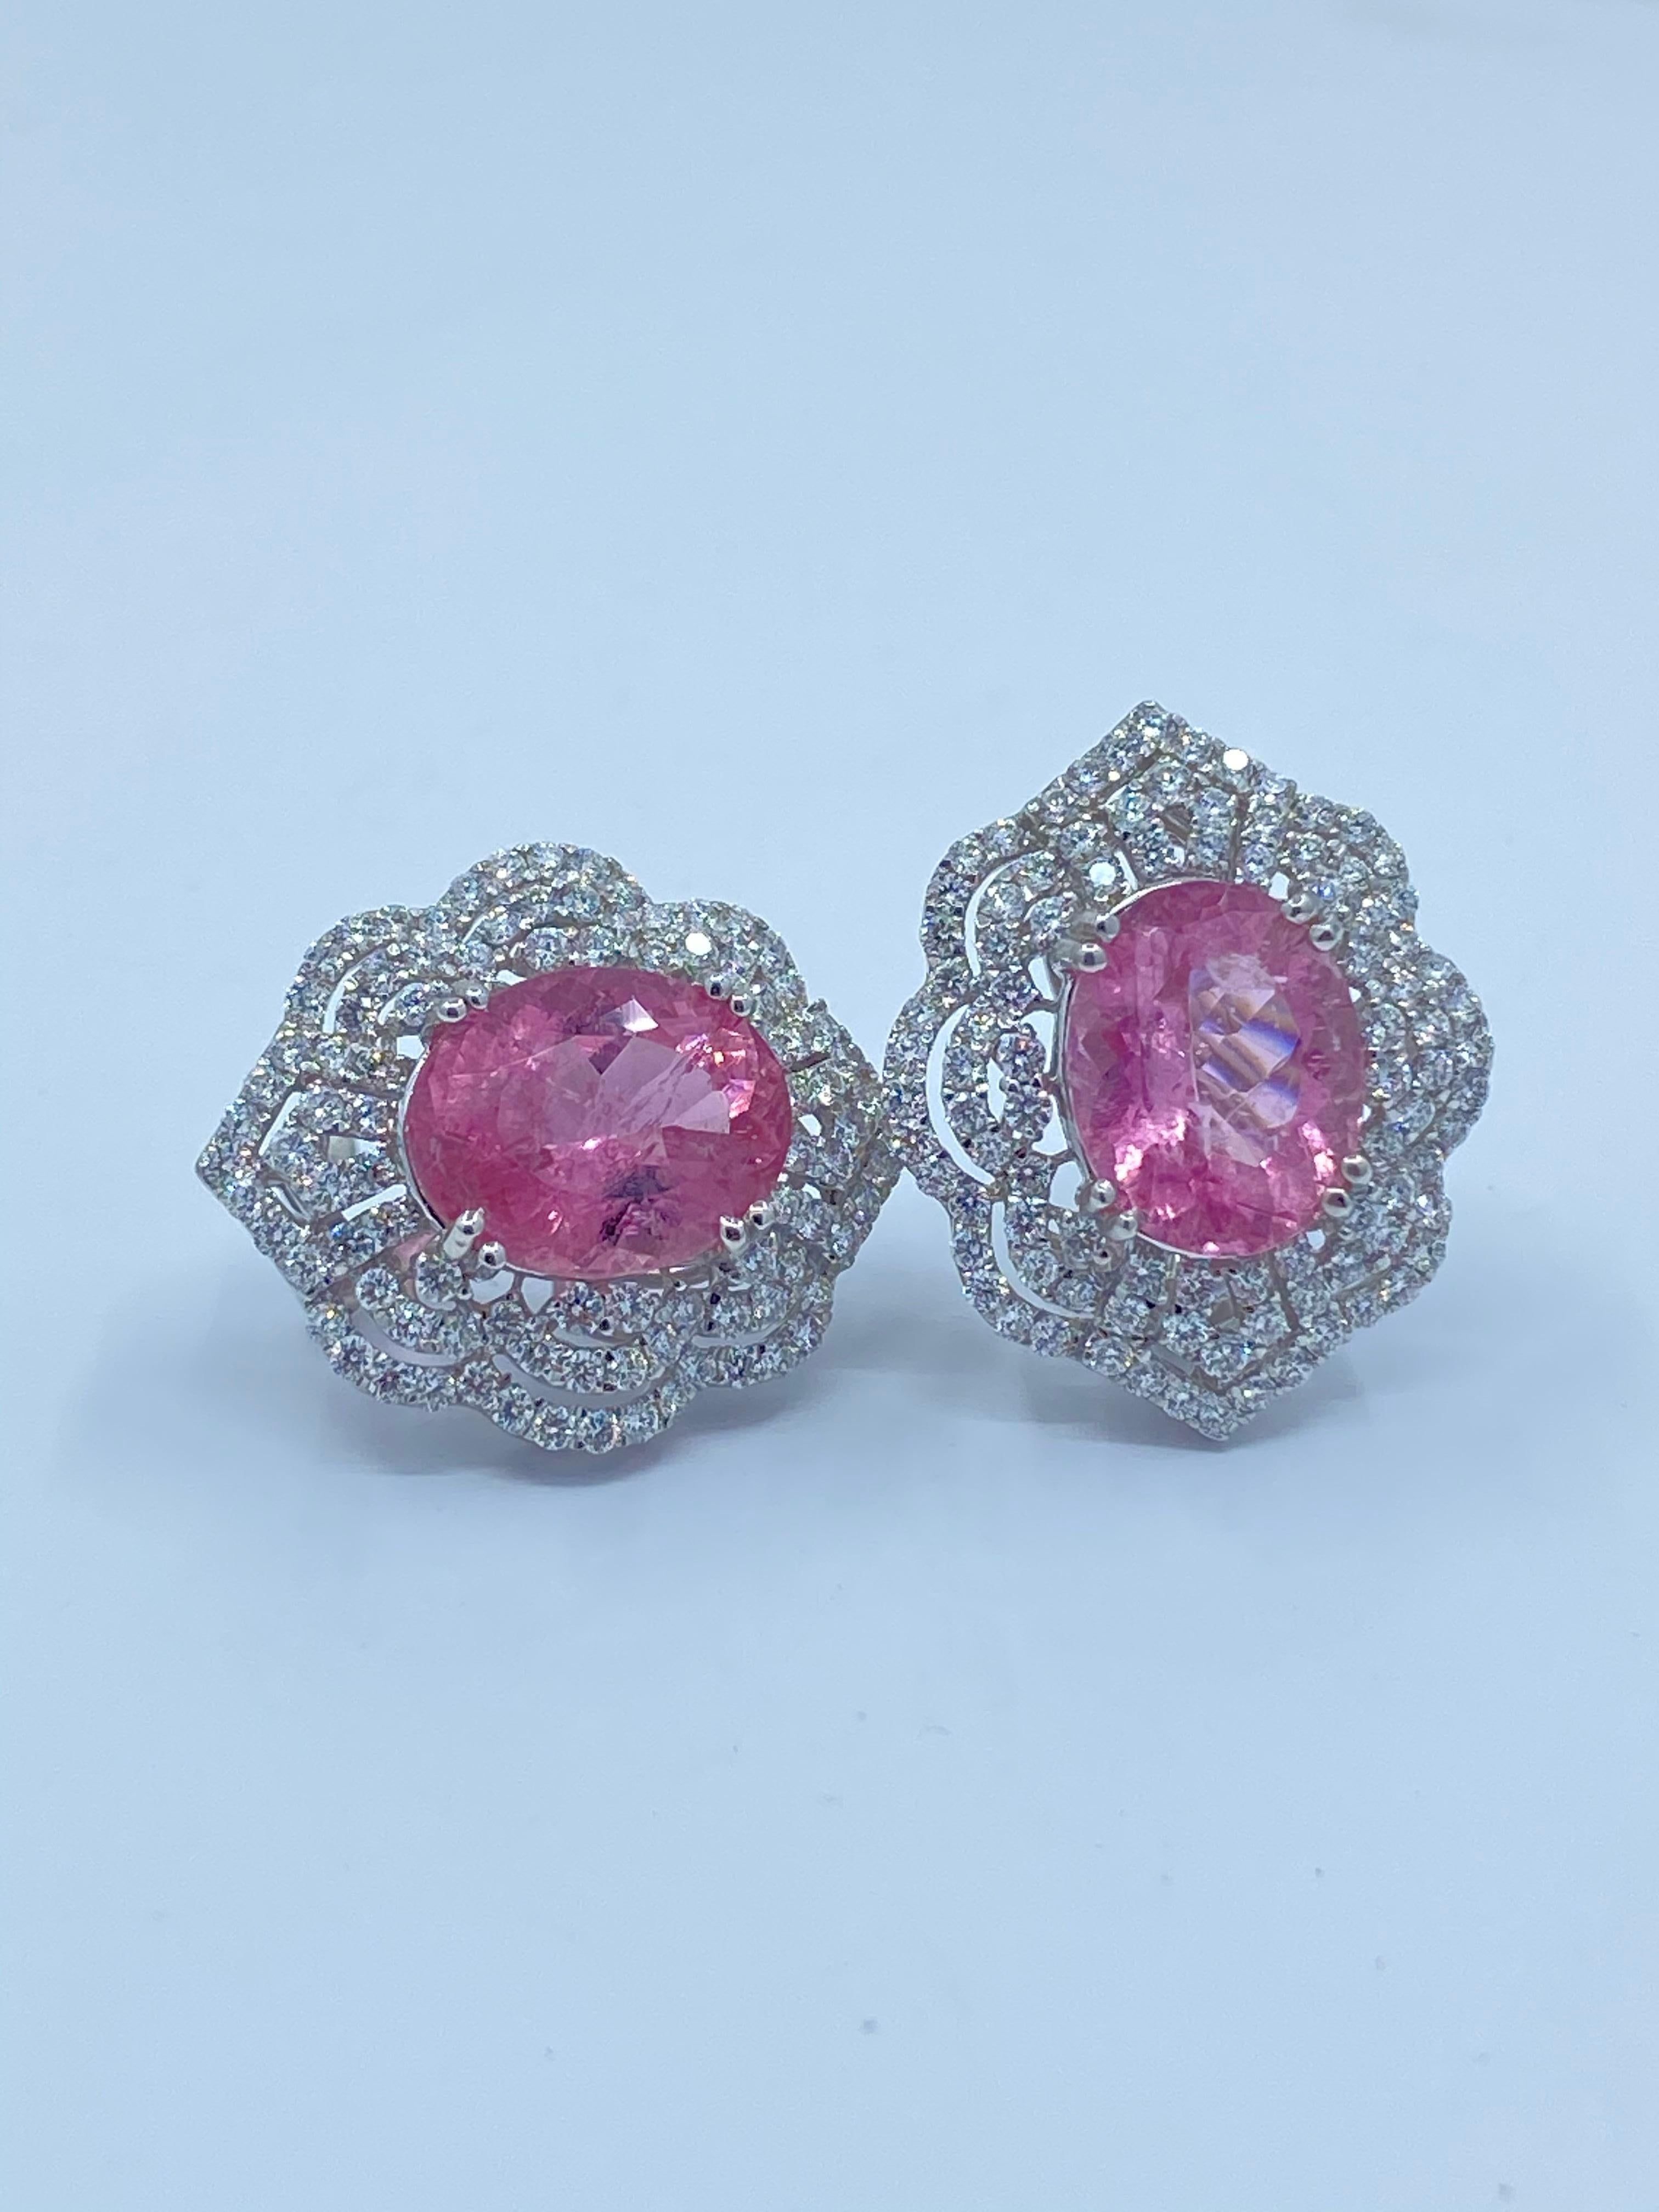 Oval Cut Exquisite Pair of 13 Carat Pink Tourmaline and Diamond 18K White Gold Earrings